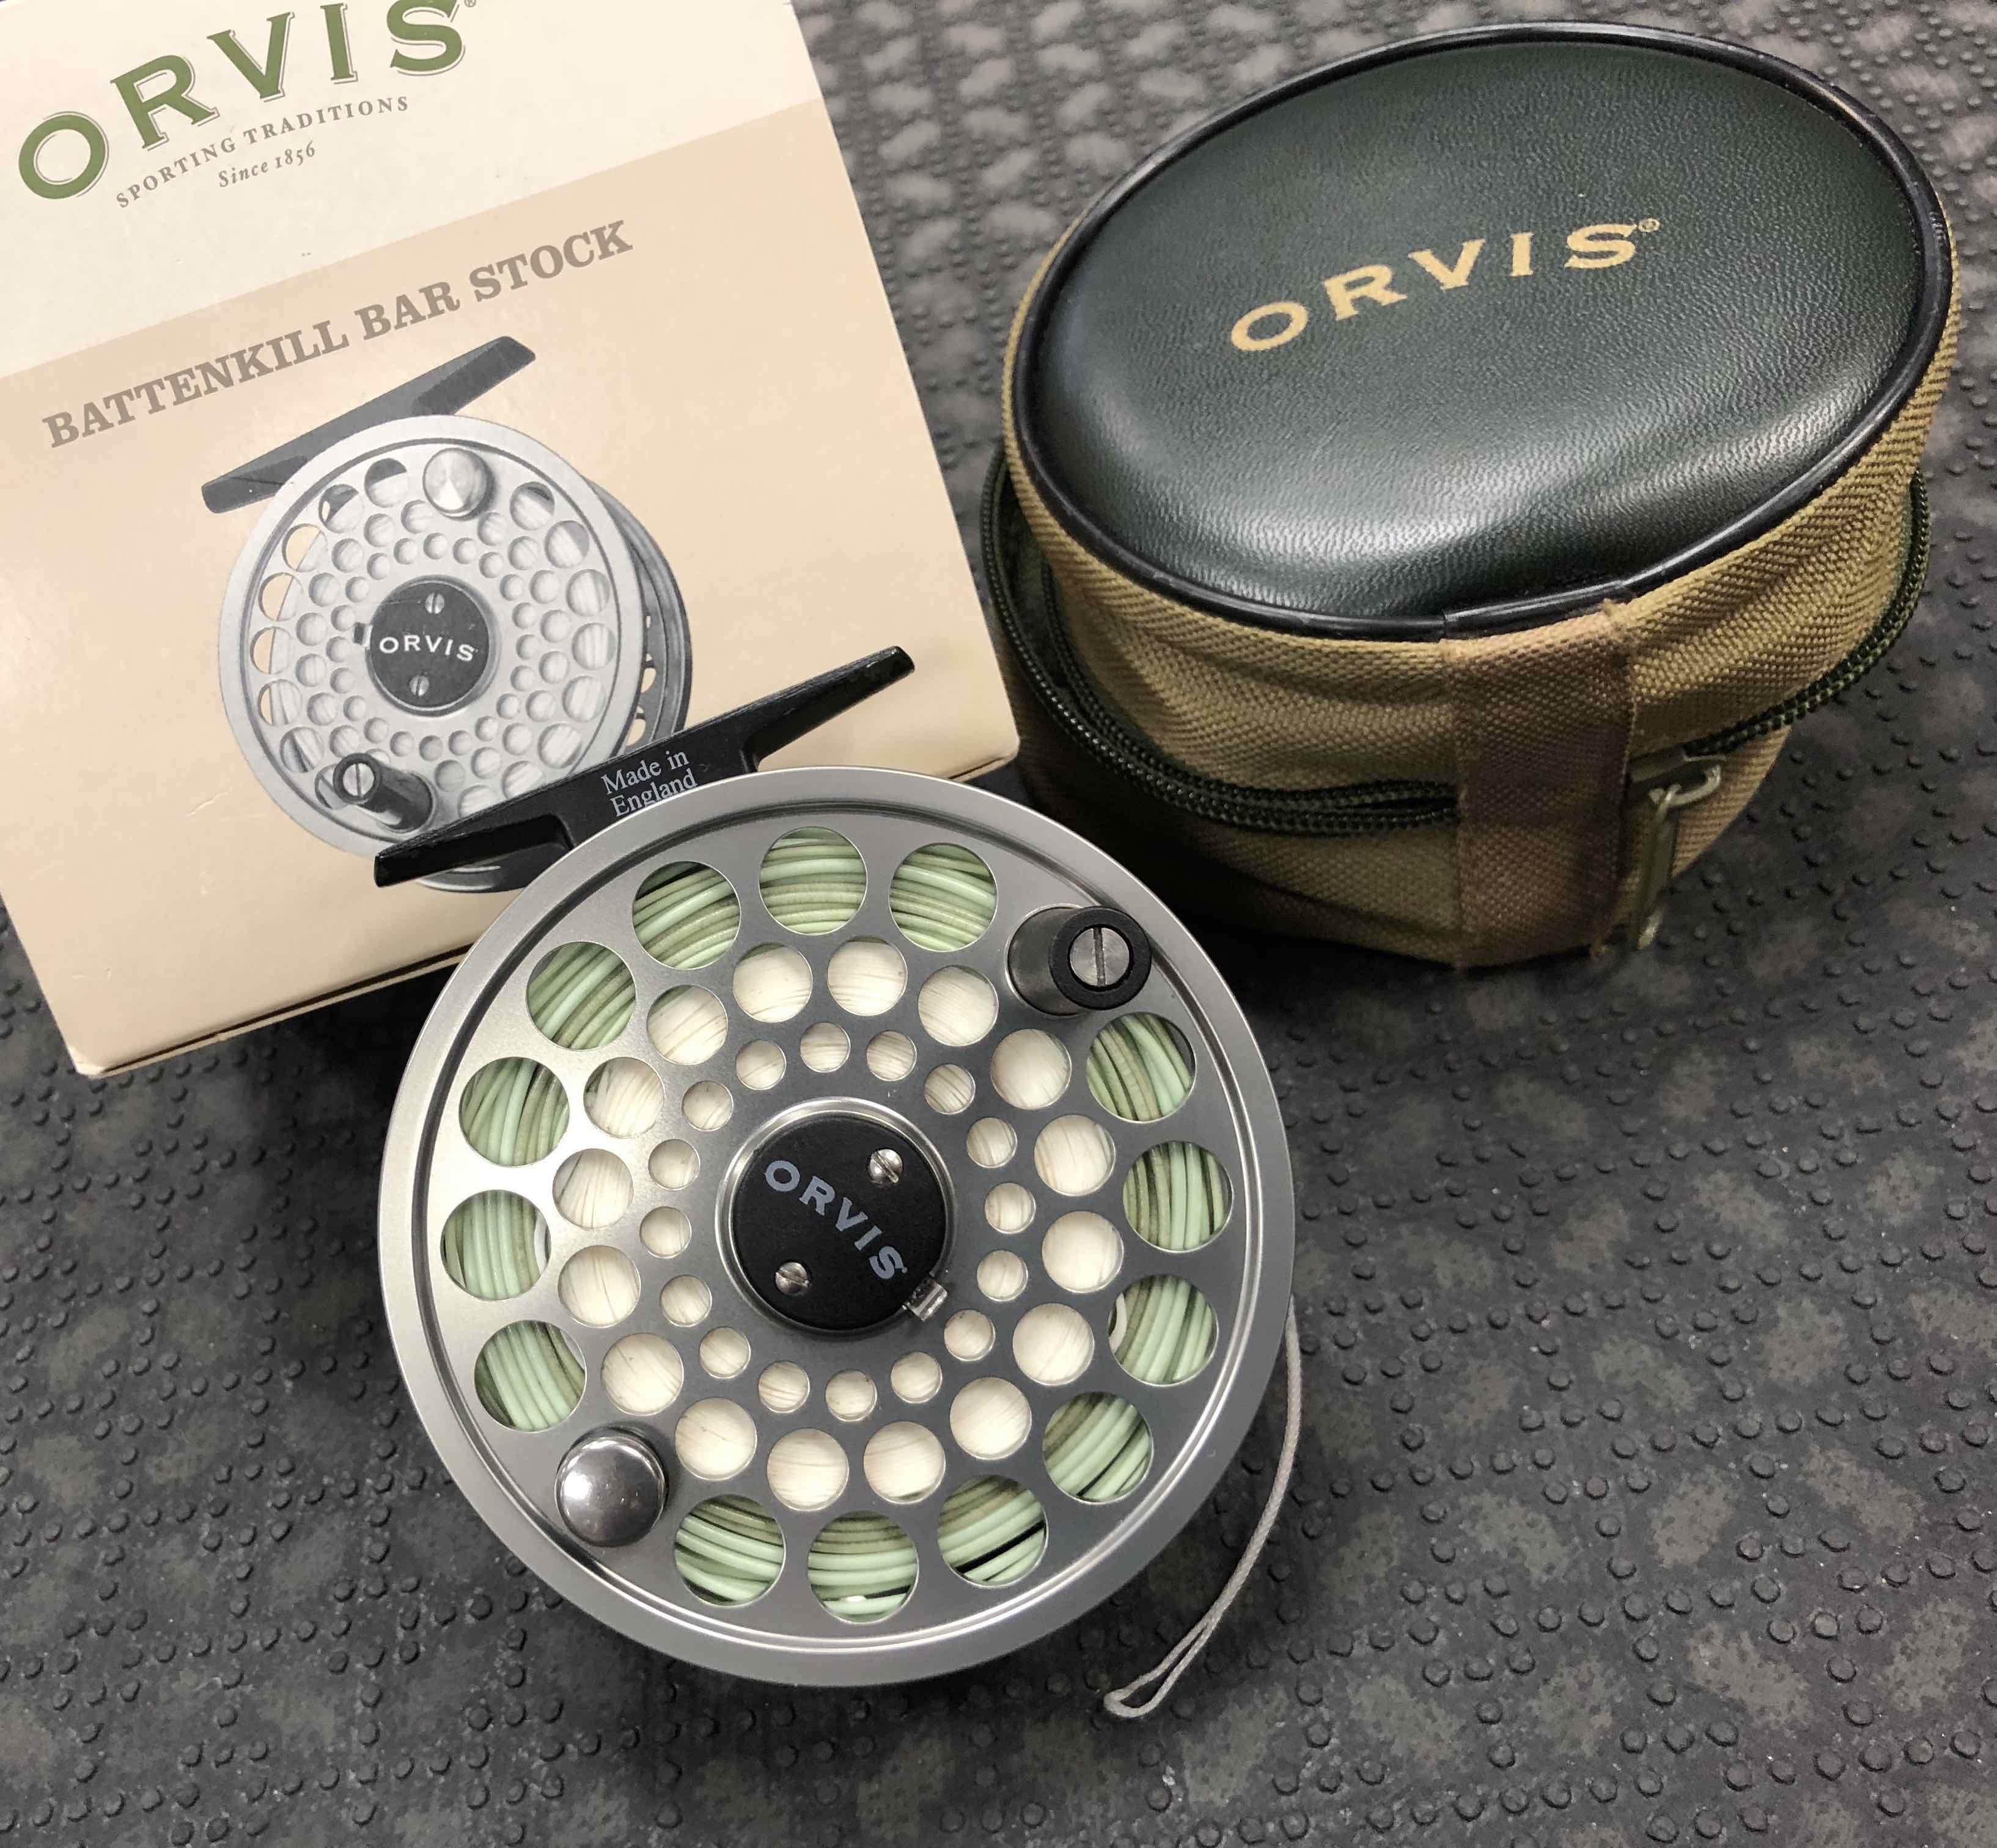 https://thefirstcast.ca/wp-content/uploads/2018/03/Orvis-Made-in-England-Battenkill-BBS-V-Fly-Reel-Titanium-cw-WF8F-Original-Box-and-Zippered-Pouch-BB.jpg